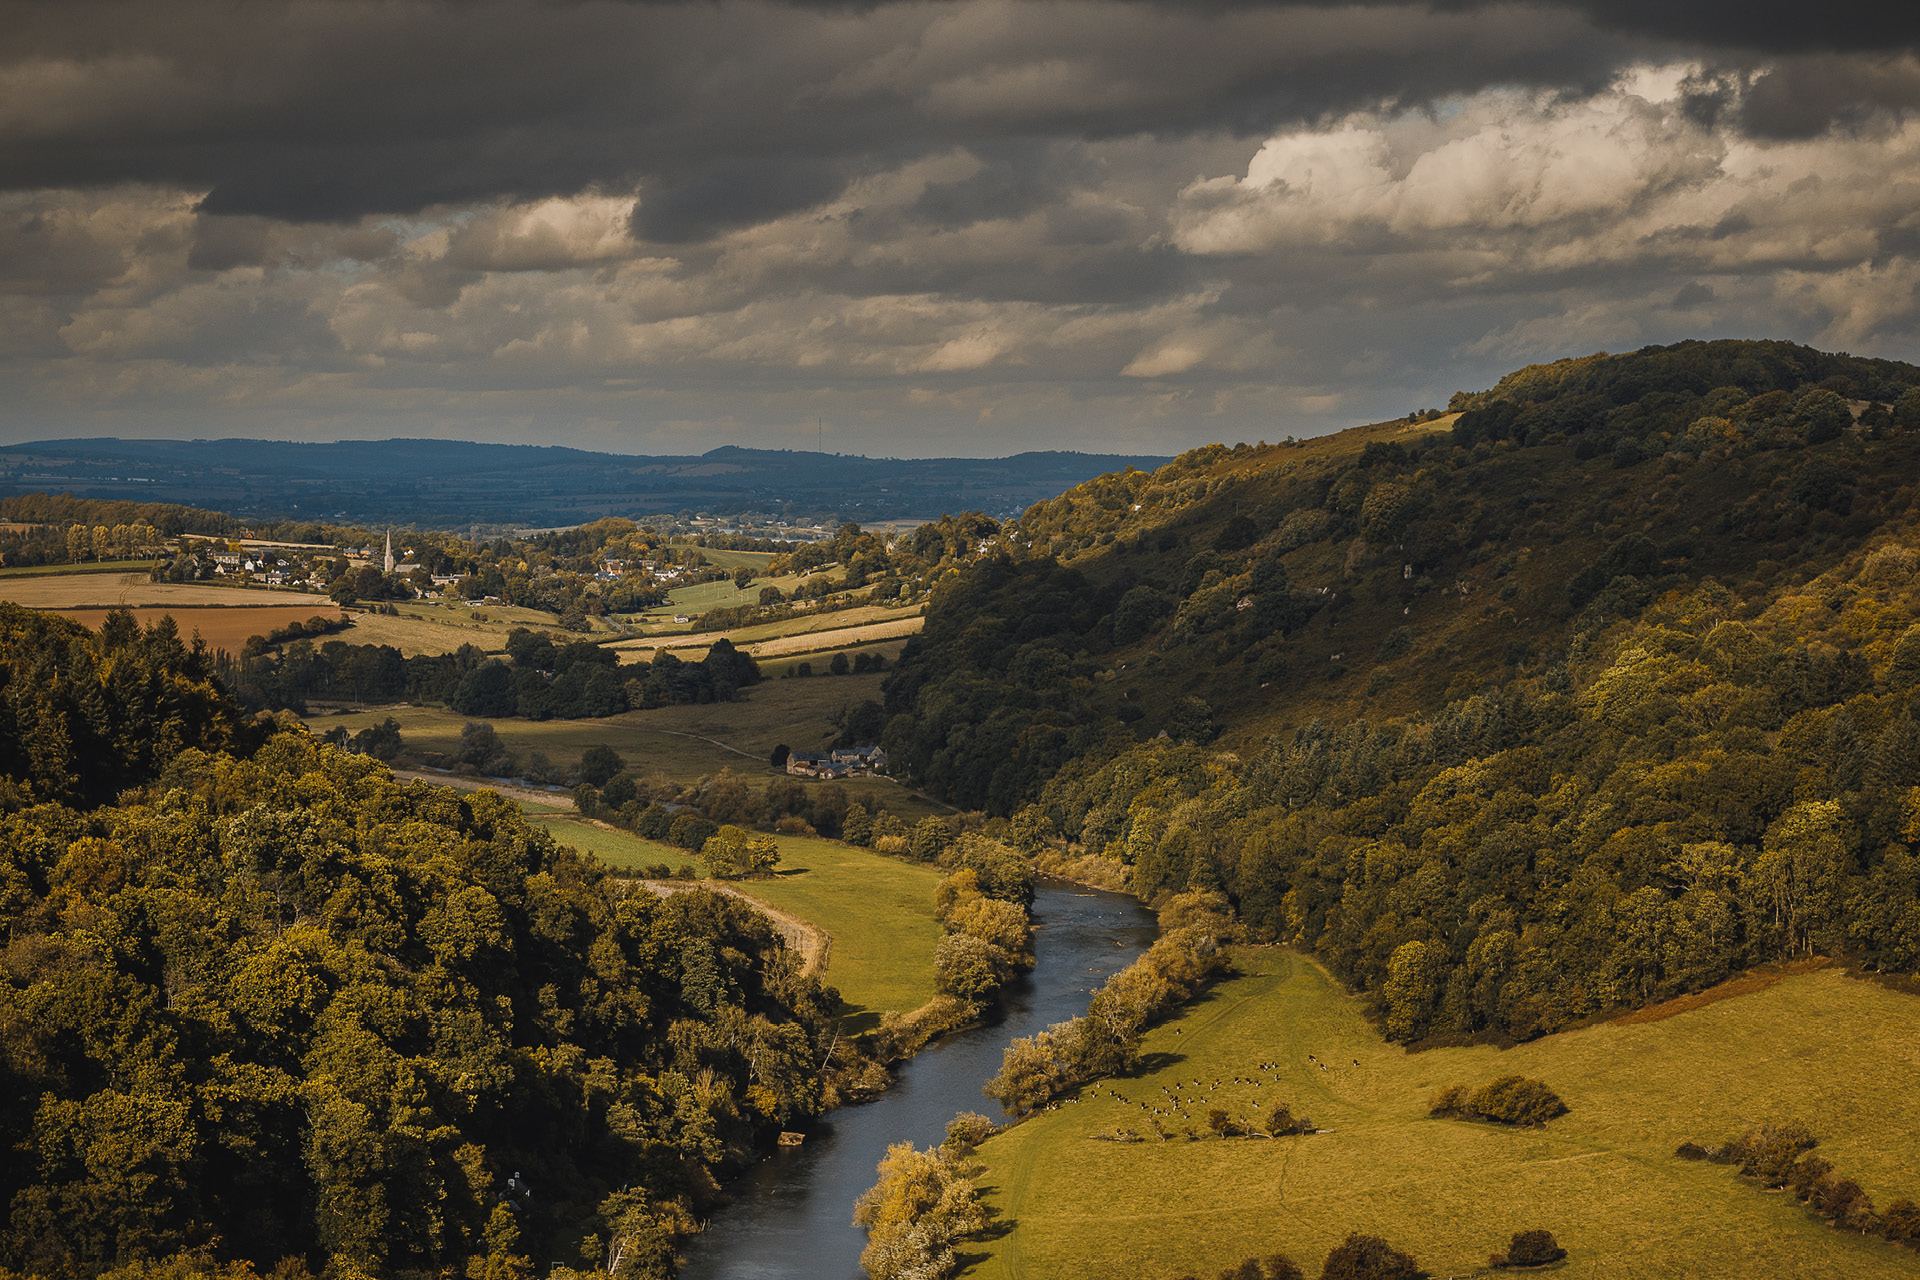 The River Wye and the village of Goodrich, as seen from Symonds Yat Rock, Gloucestershire and Herefordshire, England.